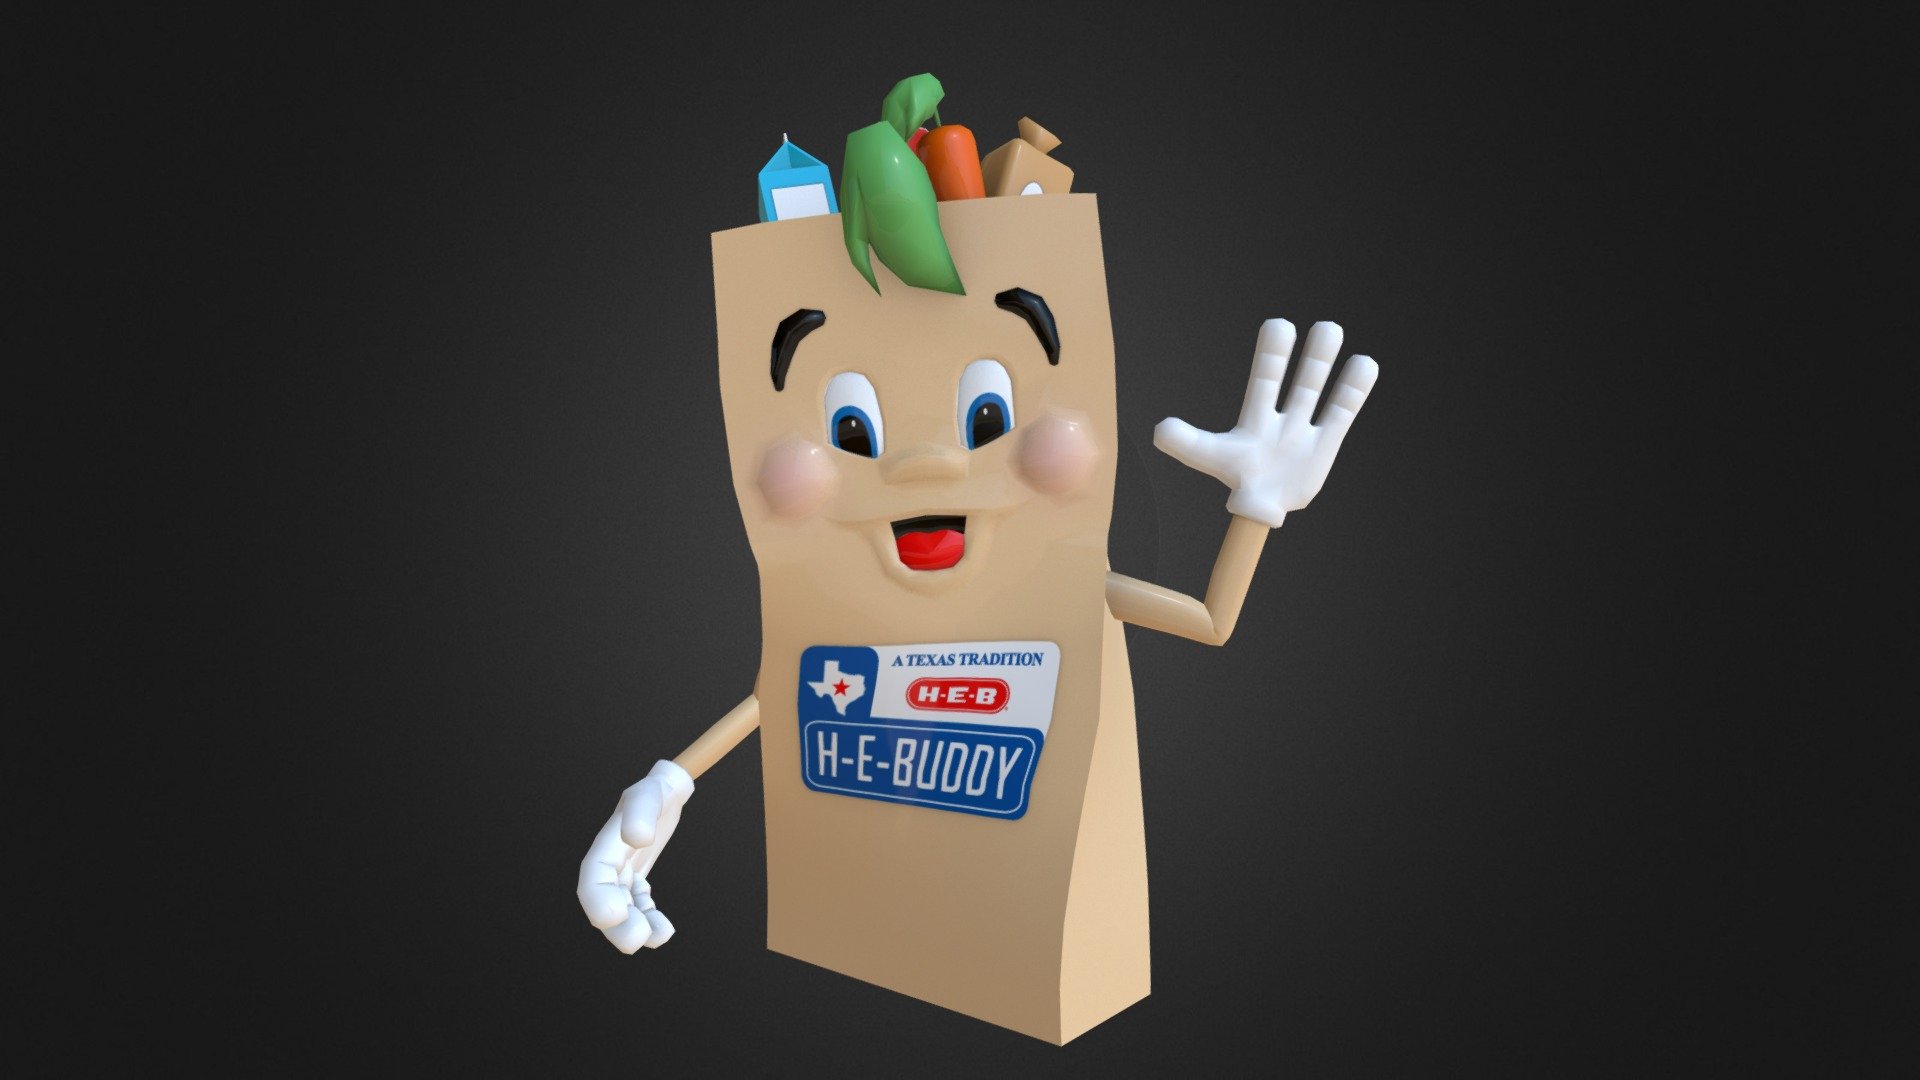 A Character model created for UTSA San Antonio Virtual Environments for the &lsquo;Any Baby Can: Walk for Autism' Virtual walk app. HeBuddy is the mascot for H-E-B Super markets, his character was designed to stand on the sidelines waving to players to encourage them 3d model